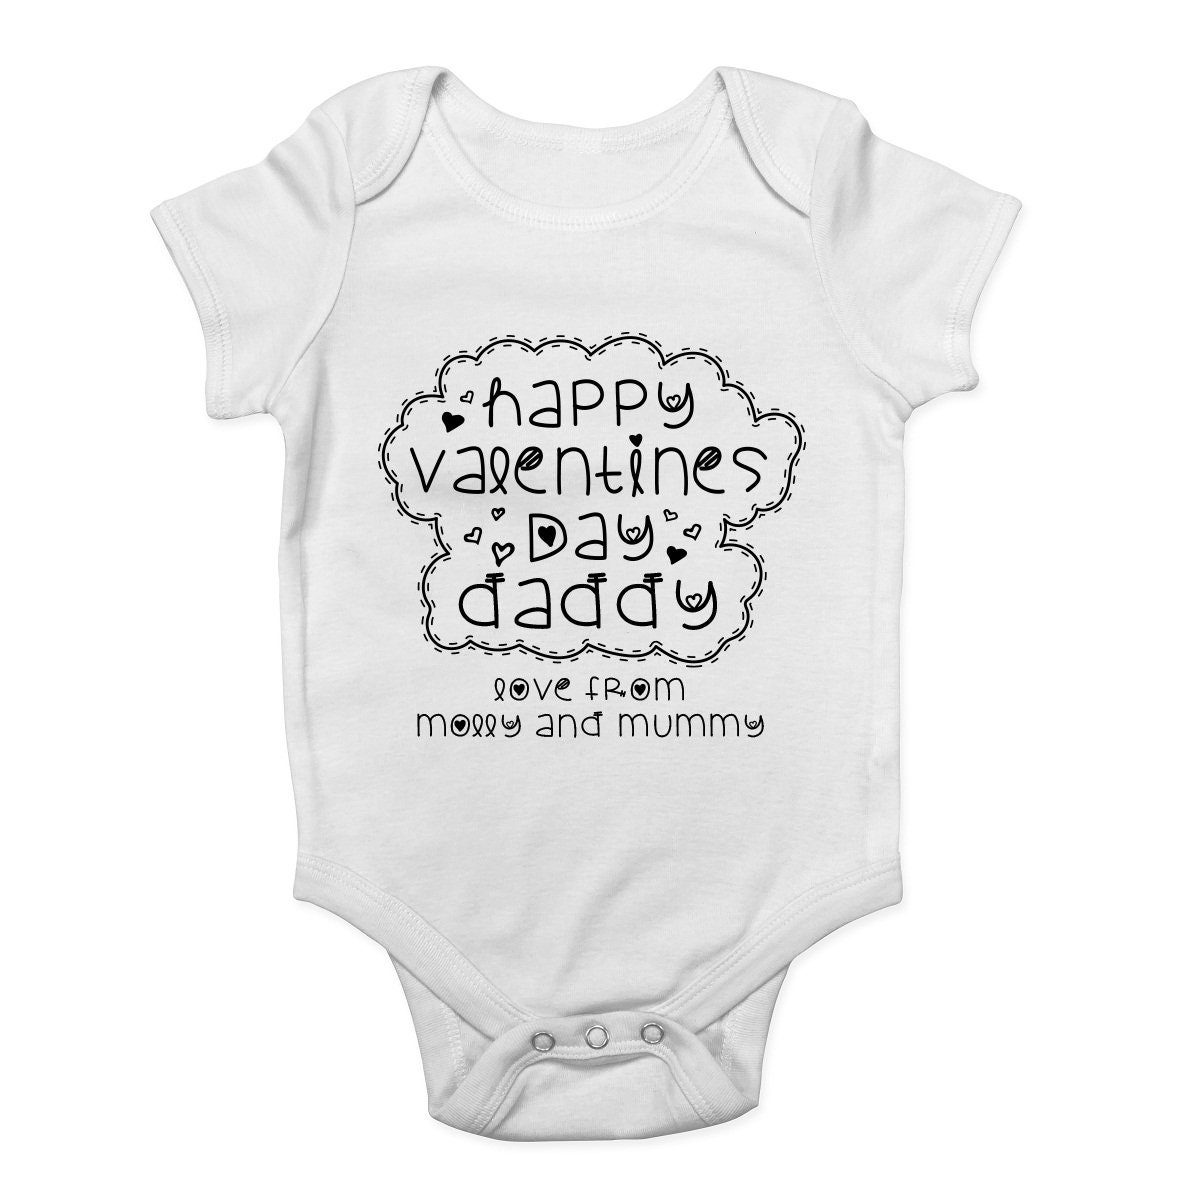 Shopagift Personalised Happy Valentines Day Daddy Baby Sleepsuit Romper